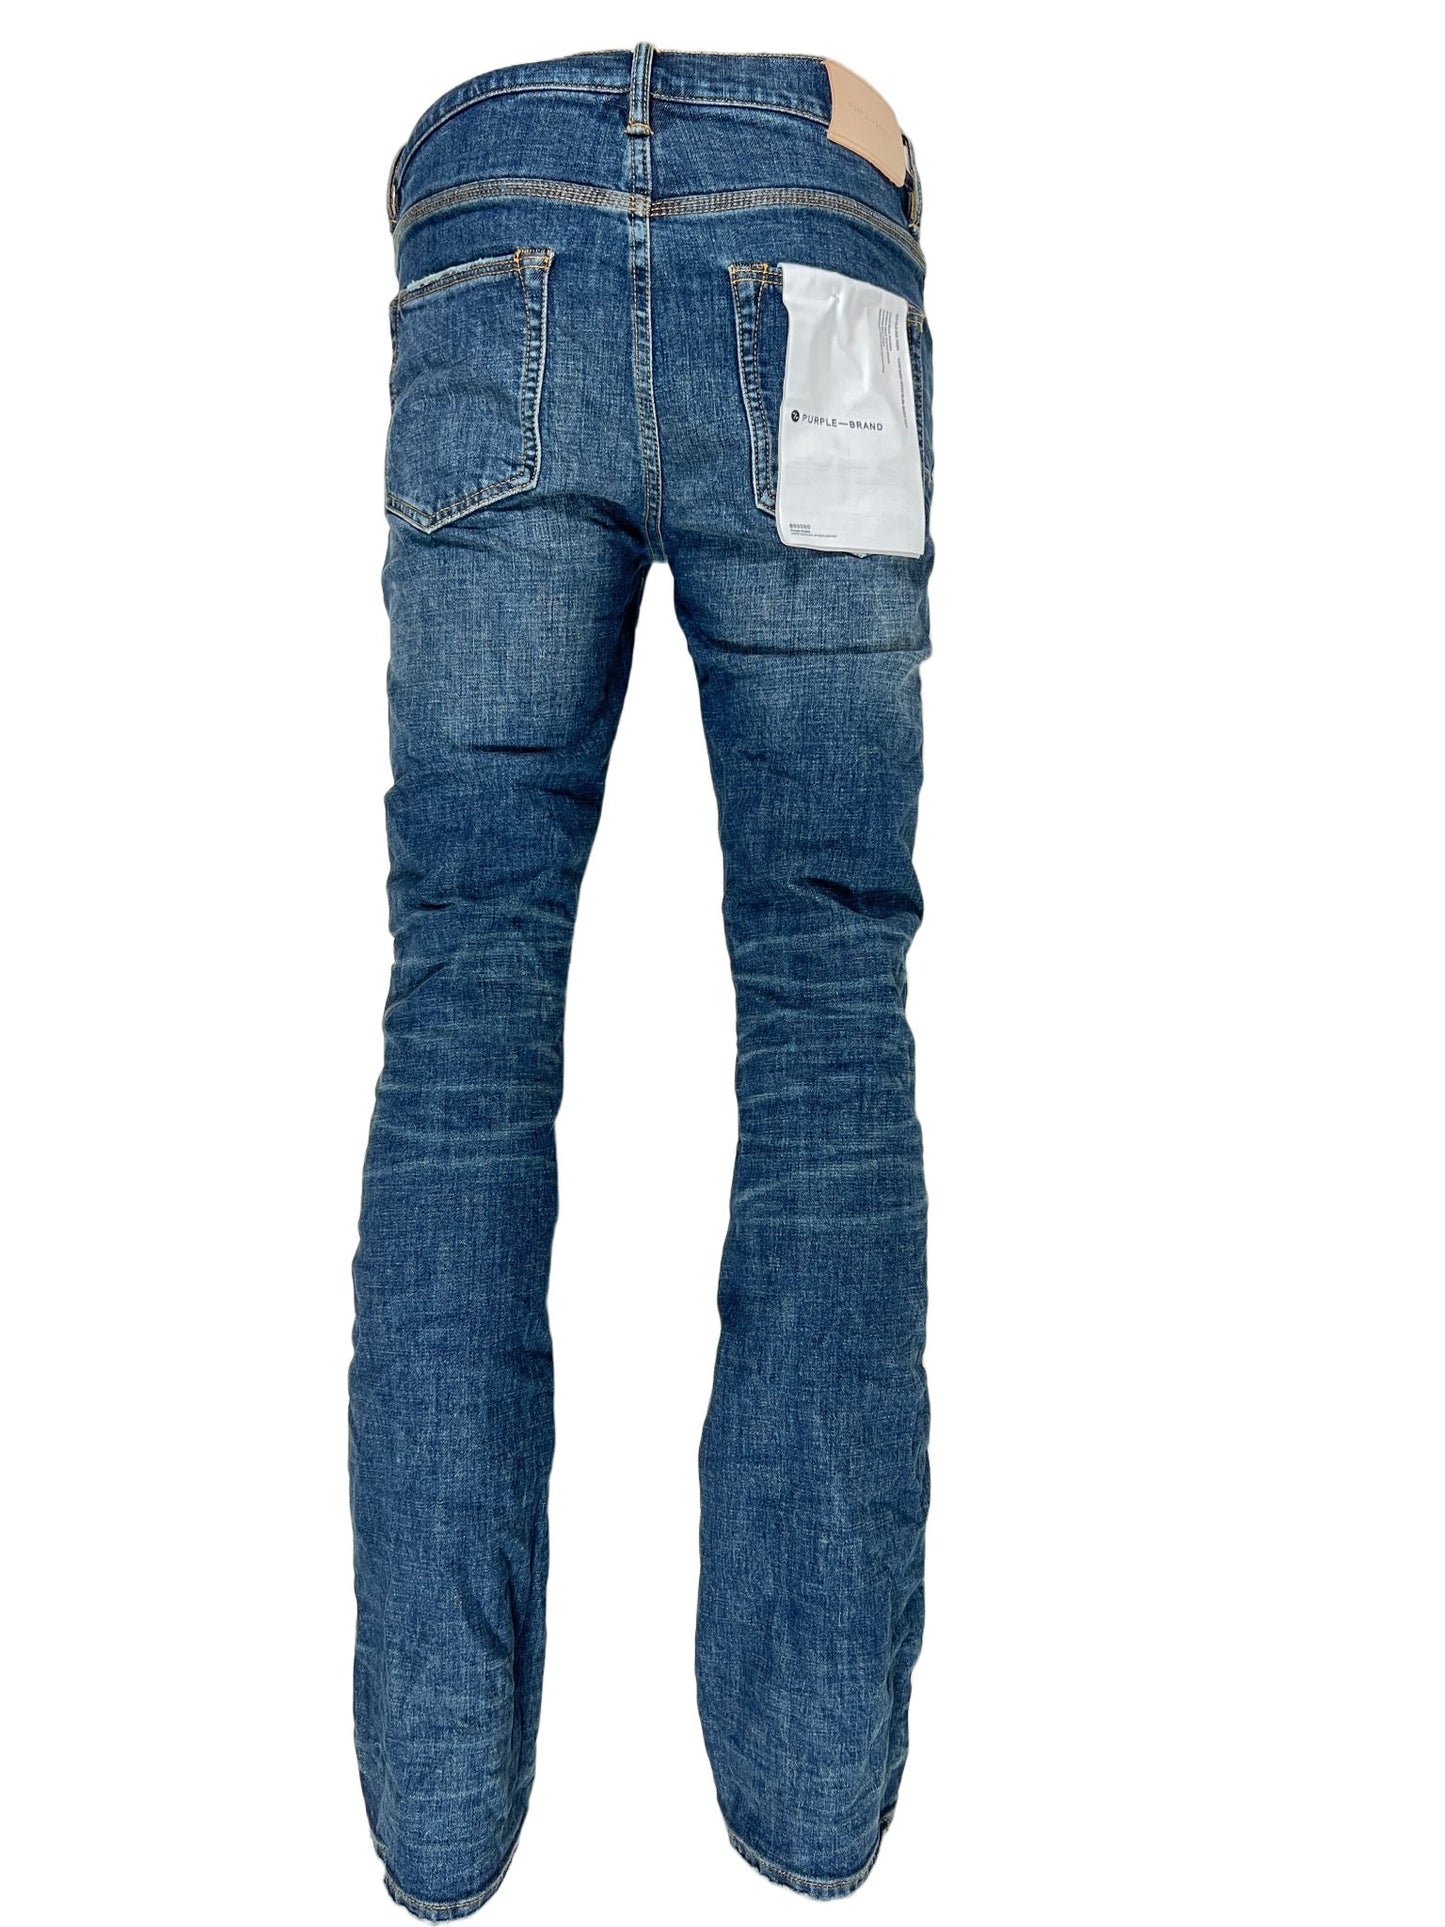 A pair of PURPLE BRAND stretch denim jeans with a pocket on the back.